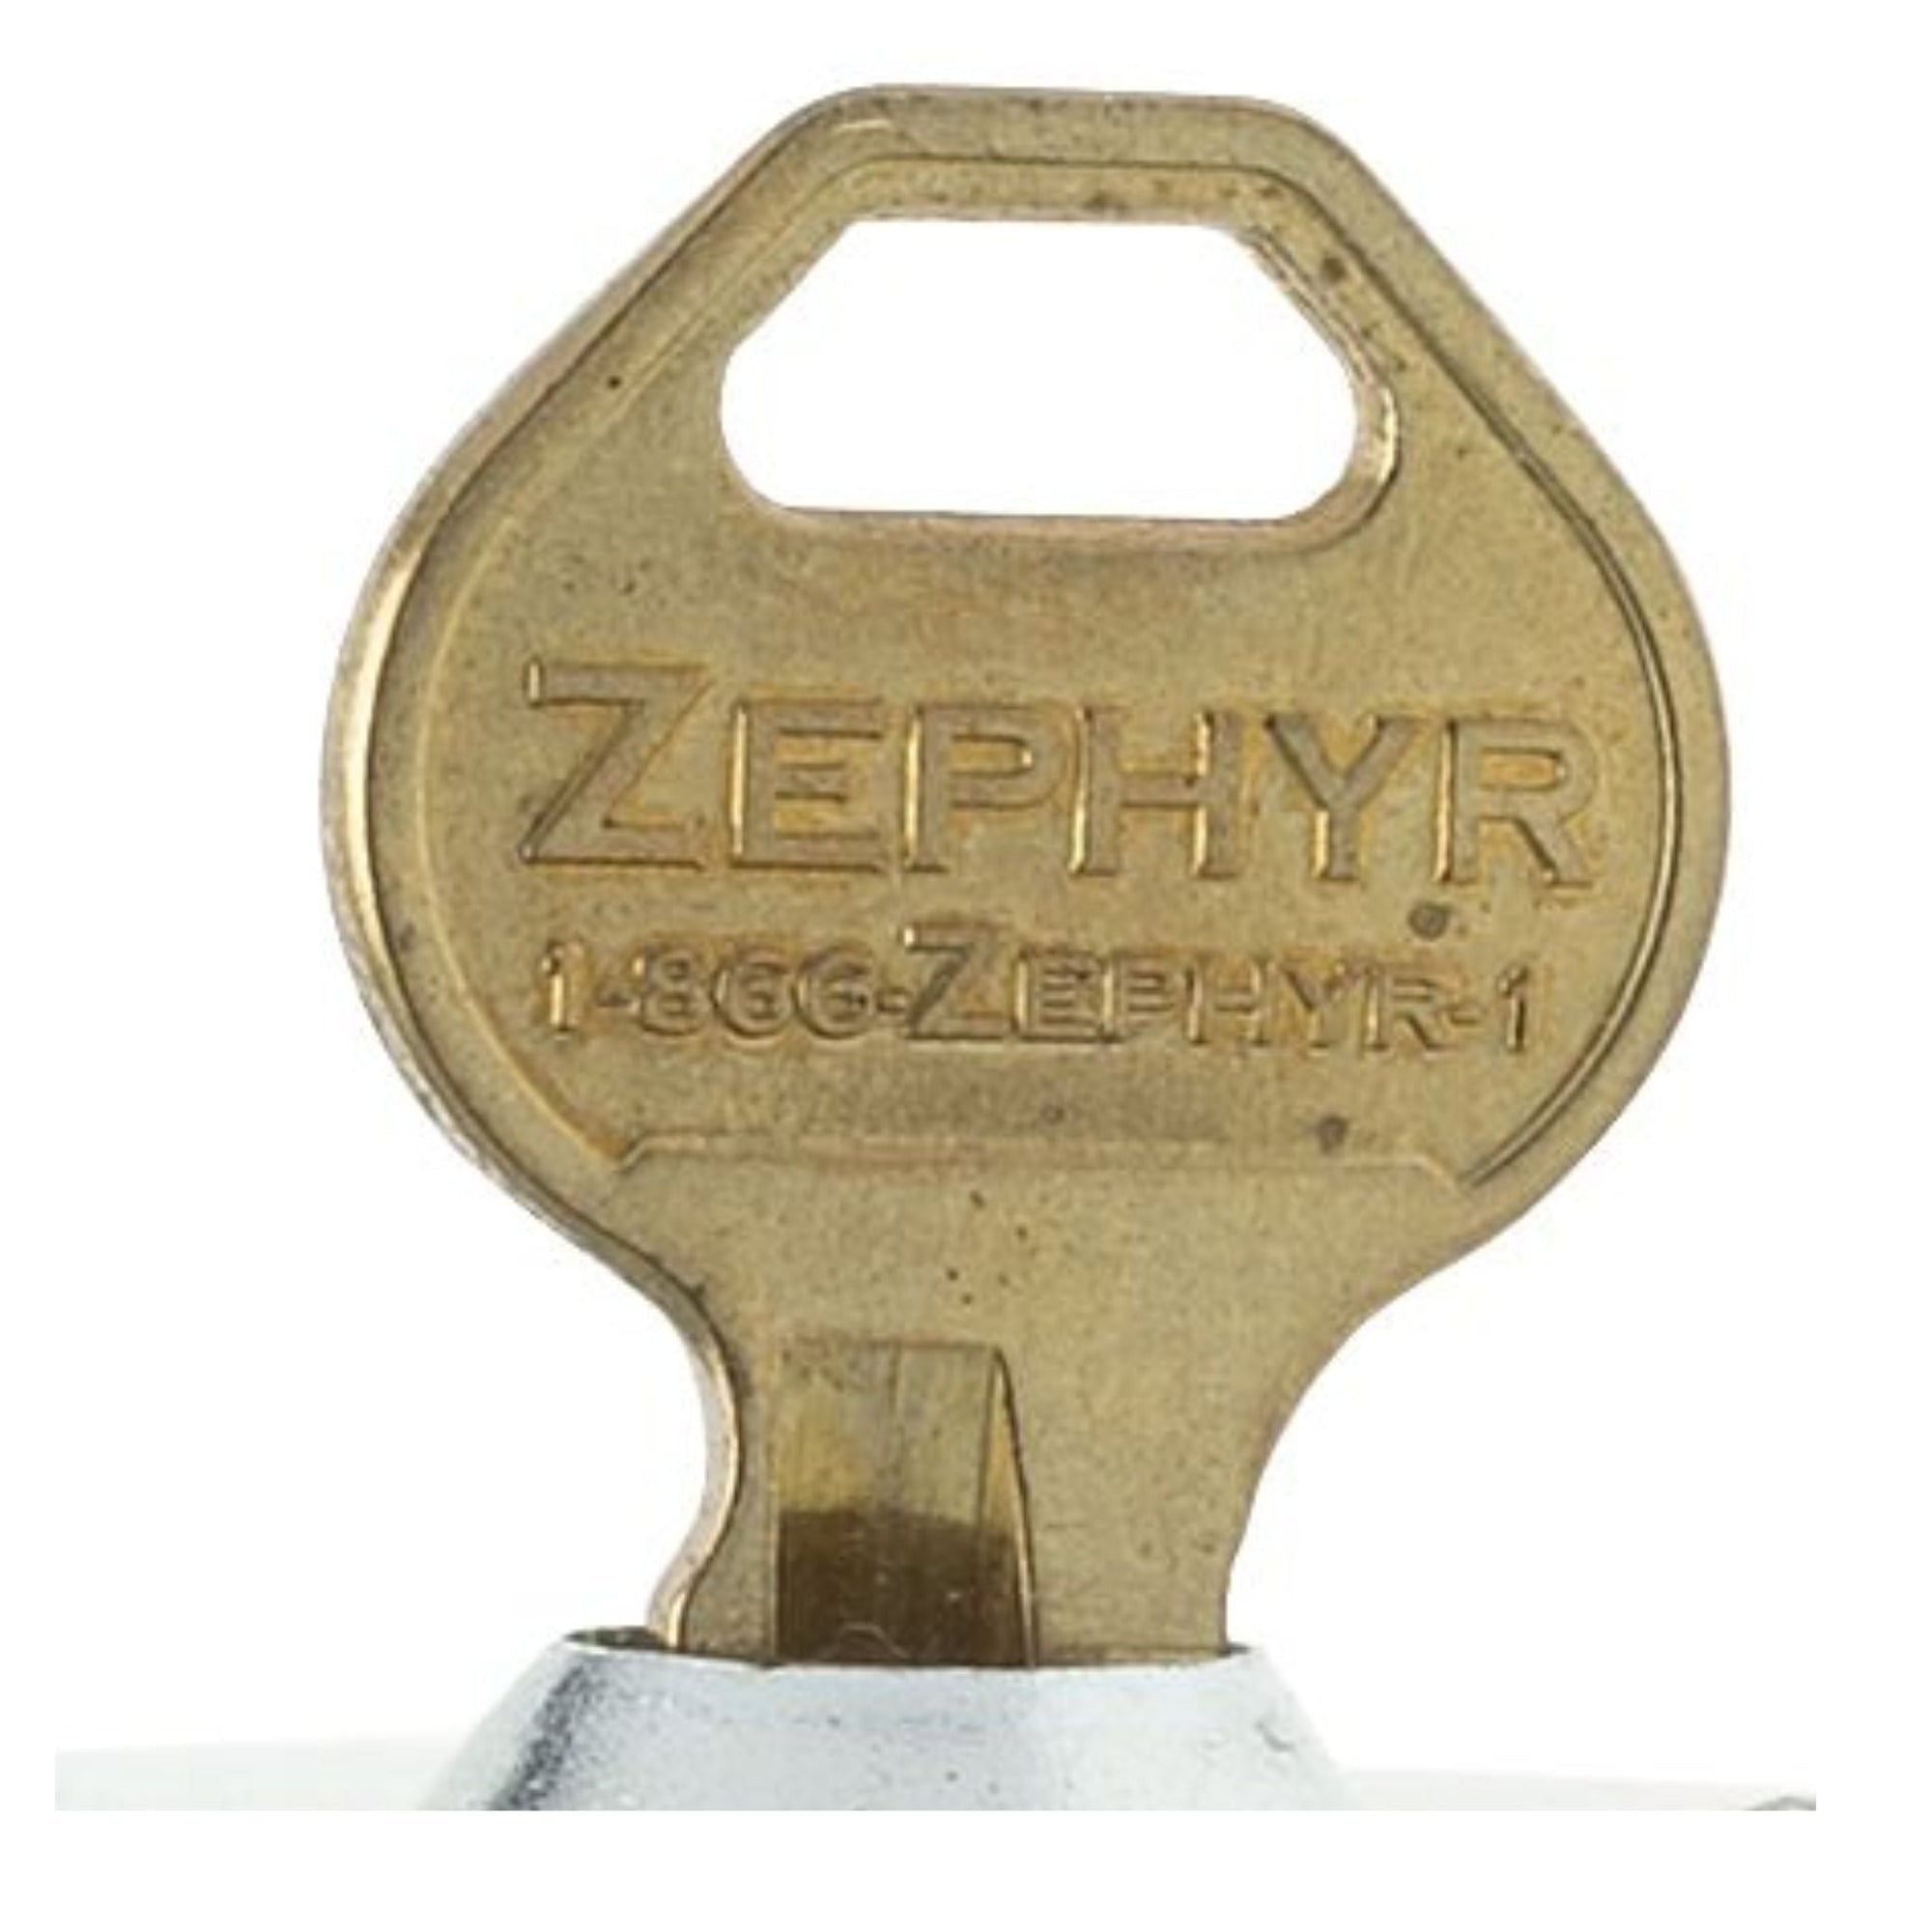 Zephyr Control Key for 1925 Series Combination Locker Locks with Key Override Control - The Lock Source